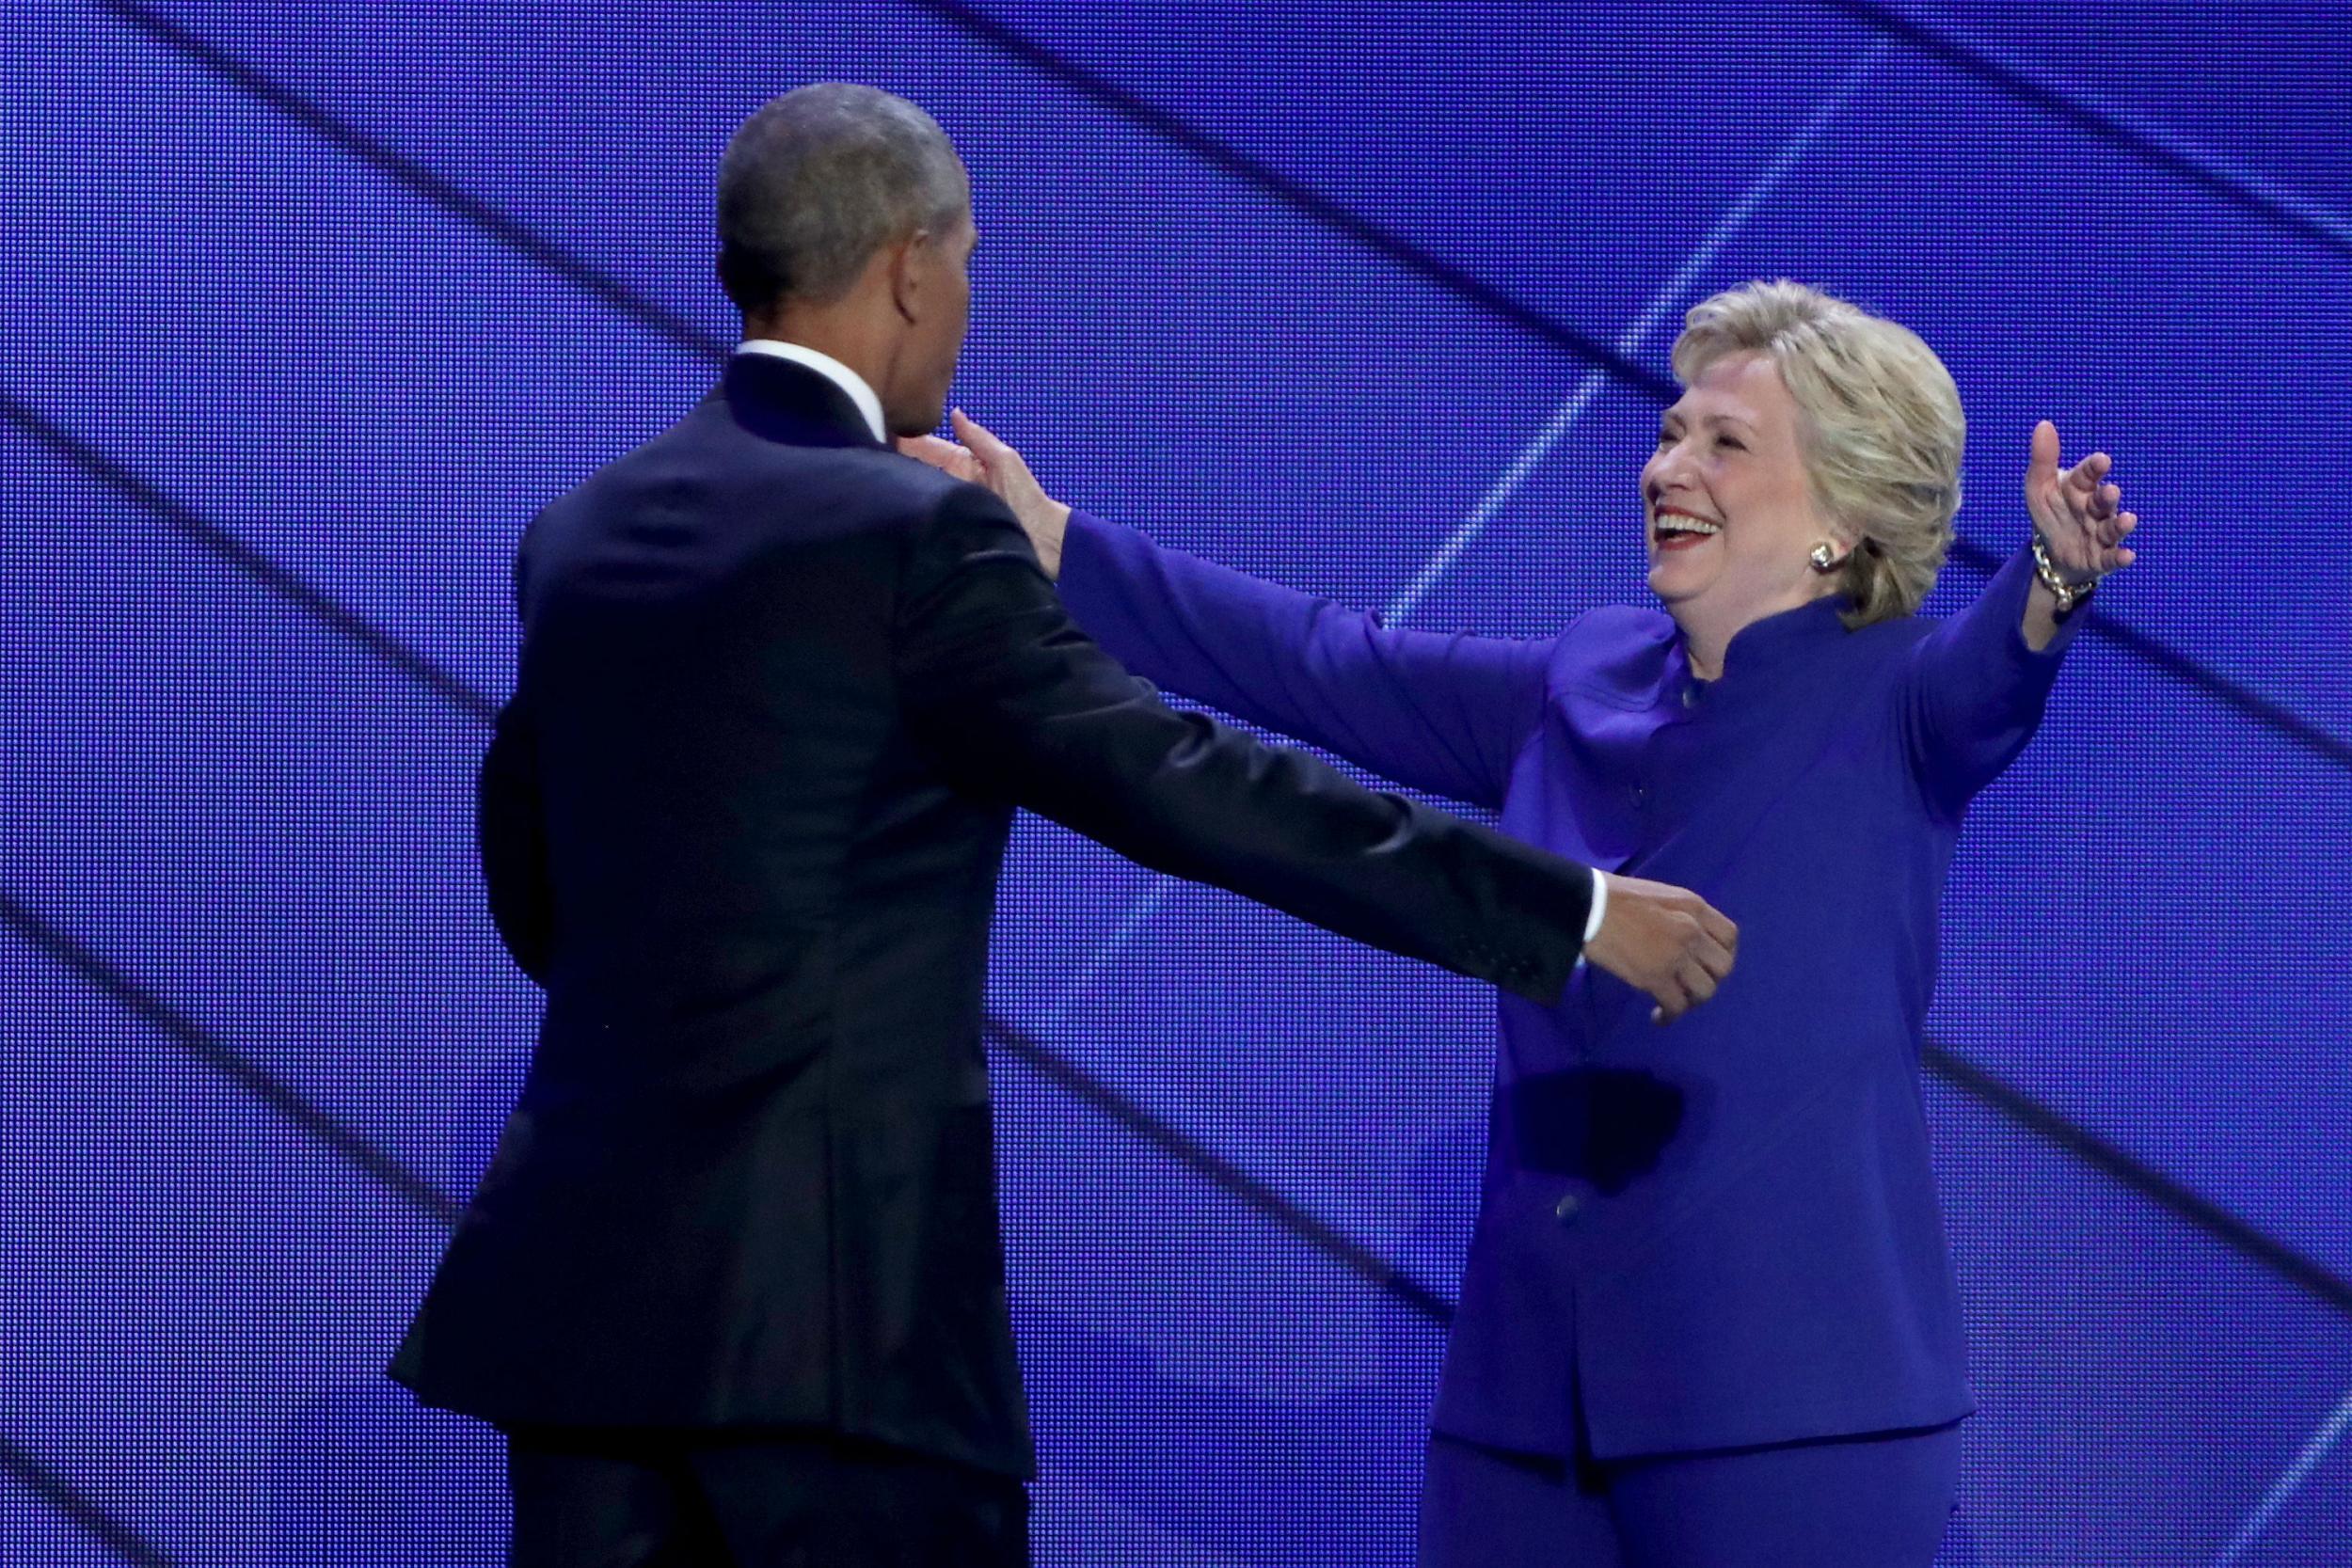 &#13;
Clinton joins Obama at the end of his speech &#13;